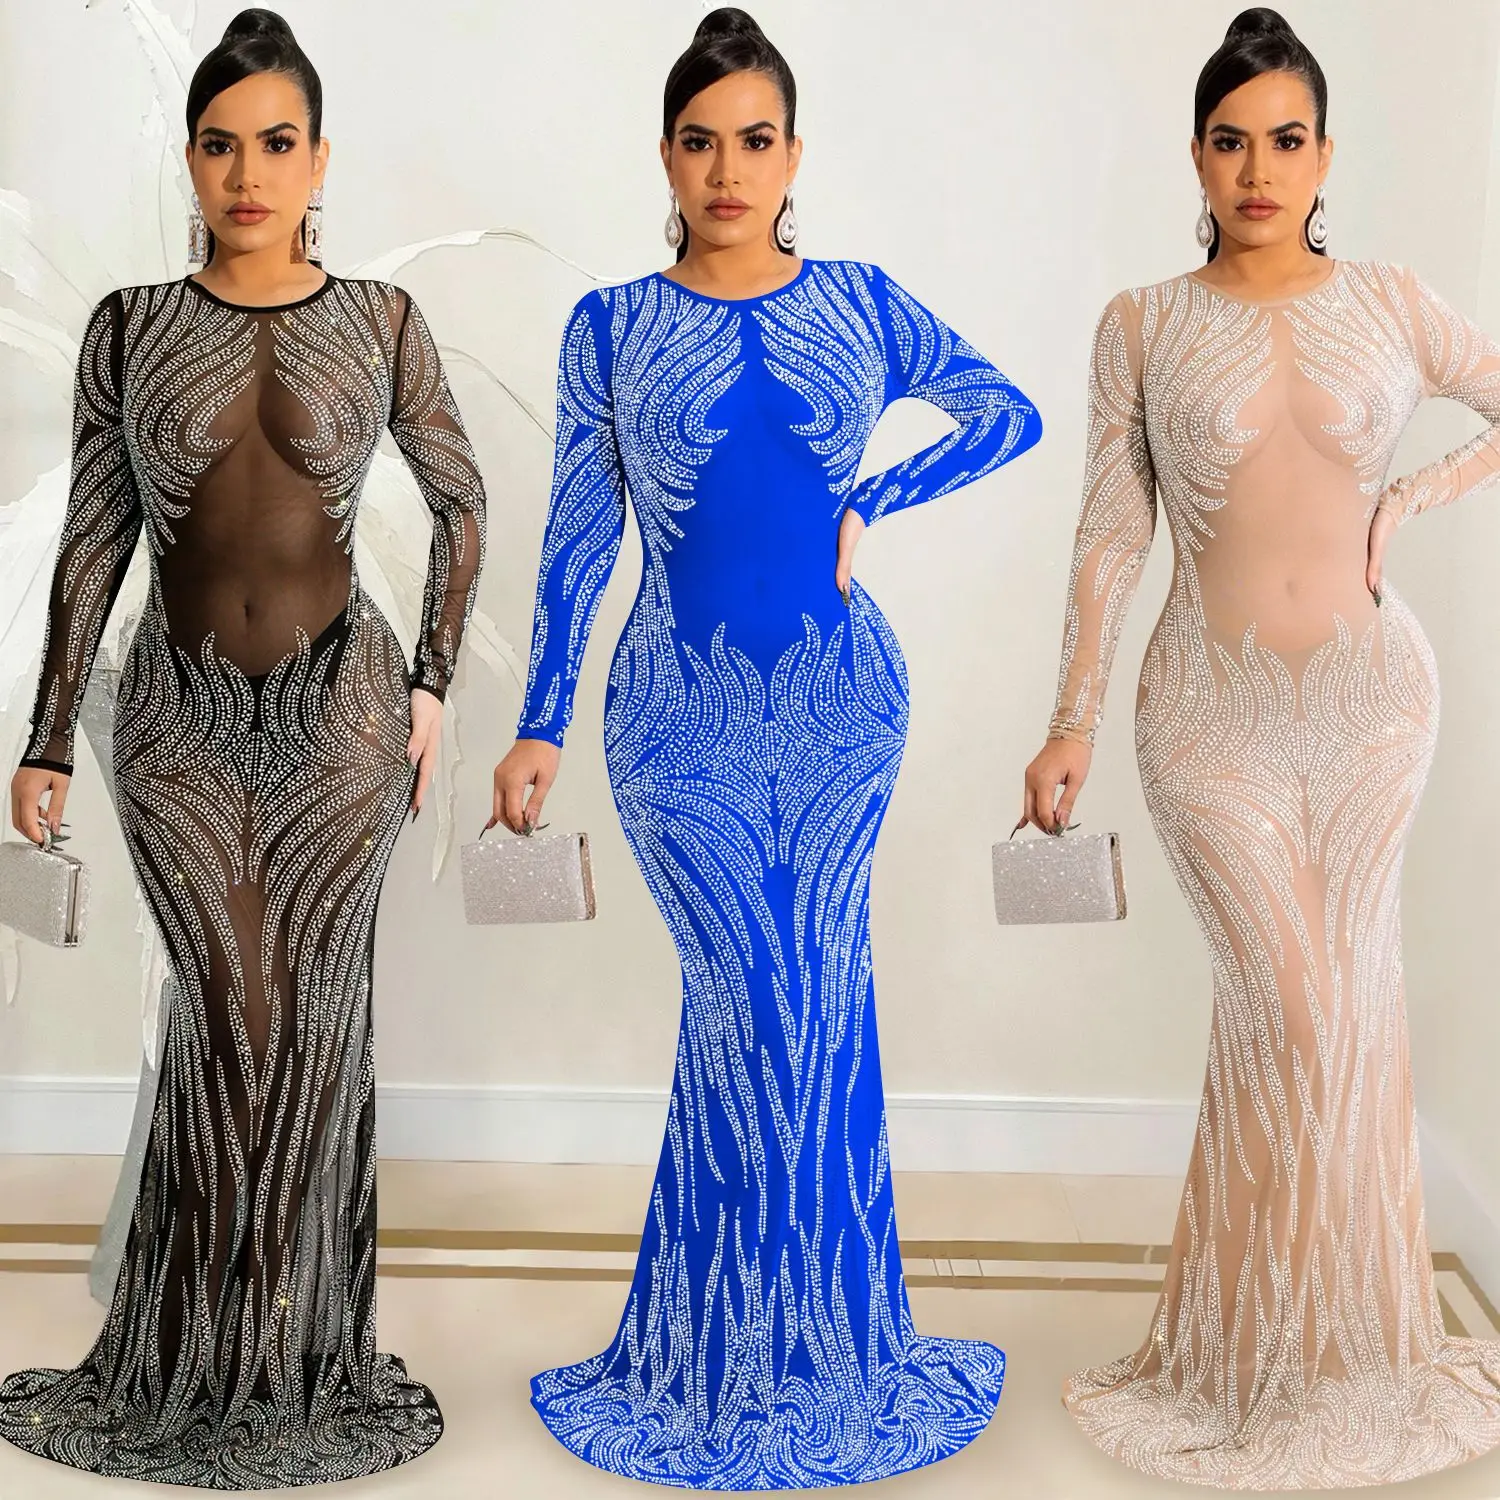 

Women Mesh See Though Diamonds Hot Drill Feather Hem Long Sleeve O-neck Bodycon Midi Maxi Long Dress for Clubwear Party